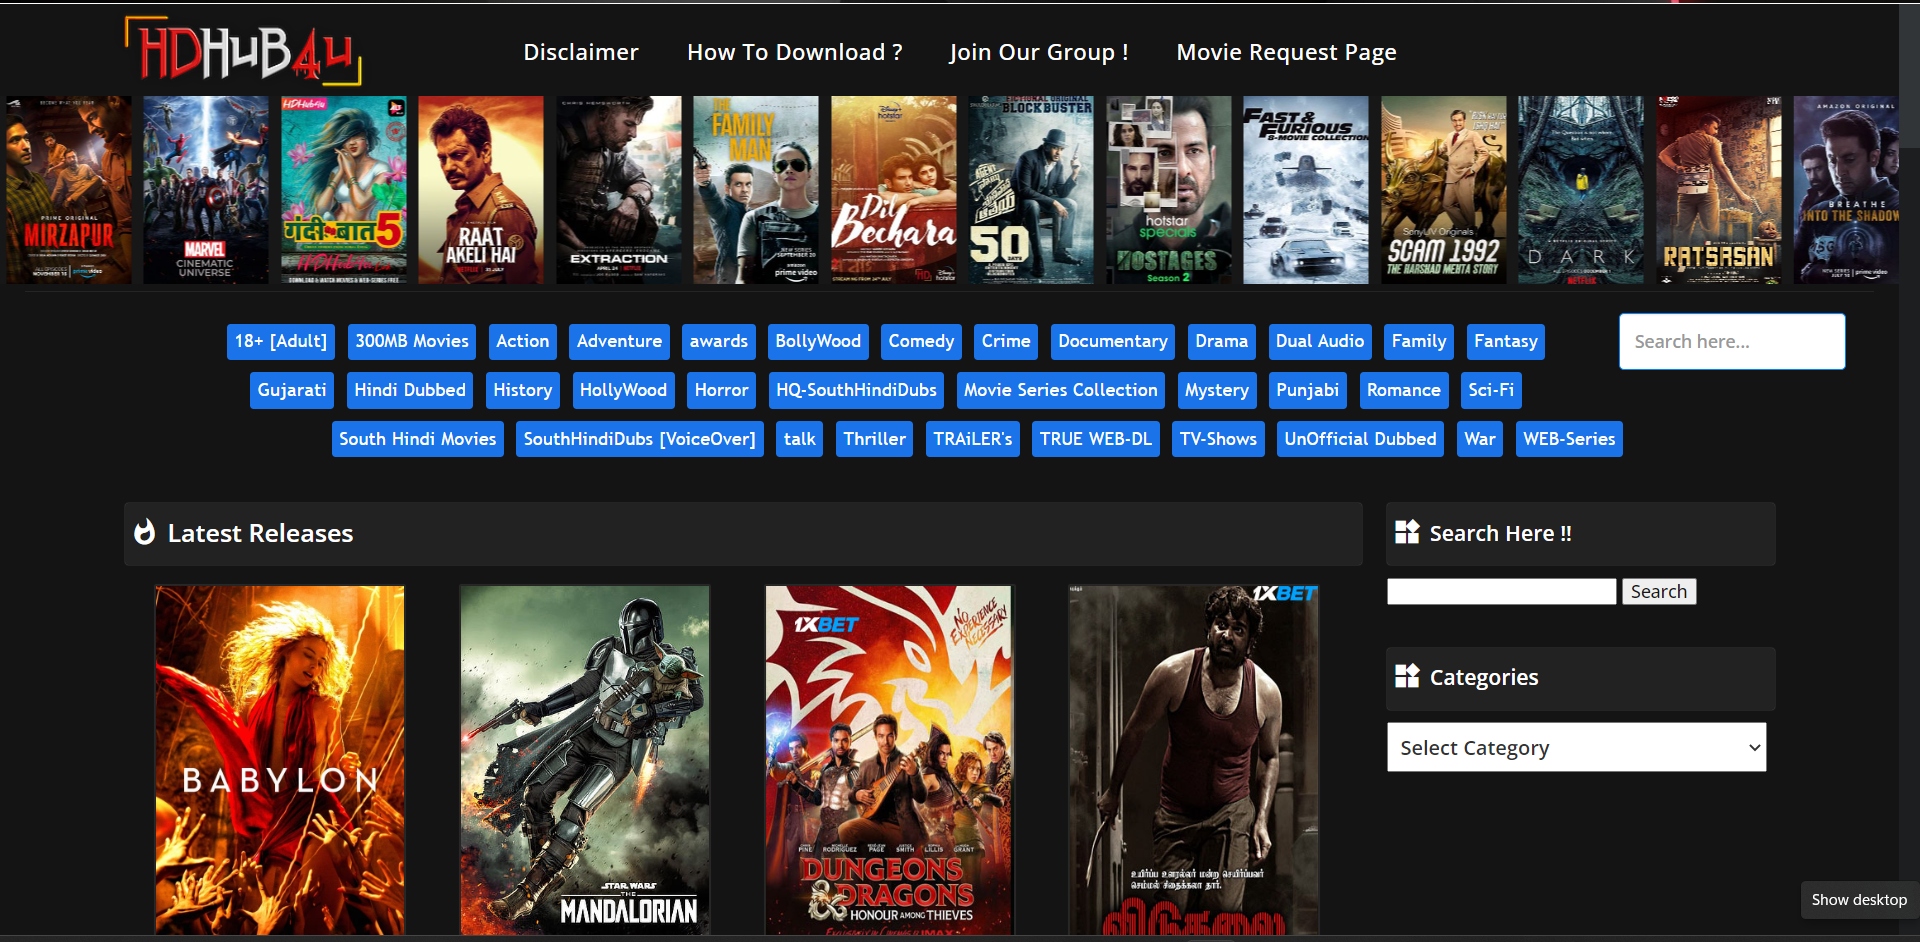 HD Hub 4U: The Ultimate Guide To Free Online Movie Streaming